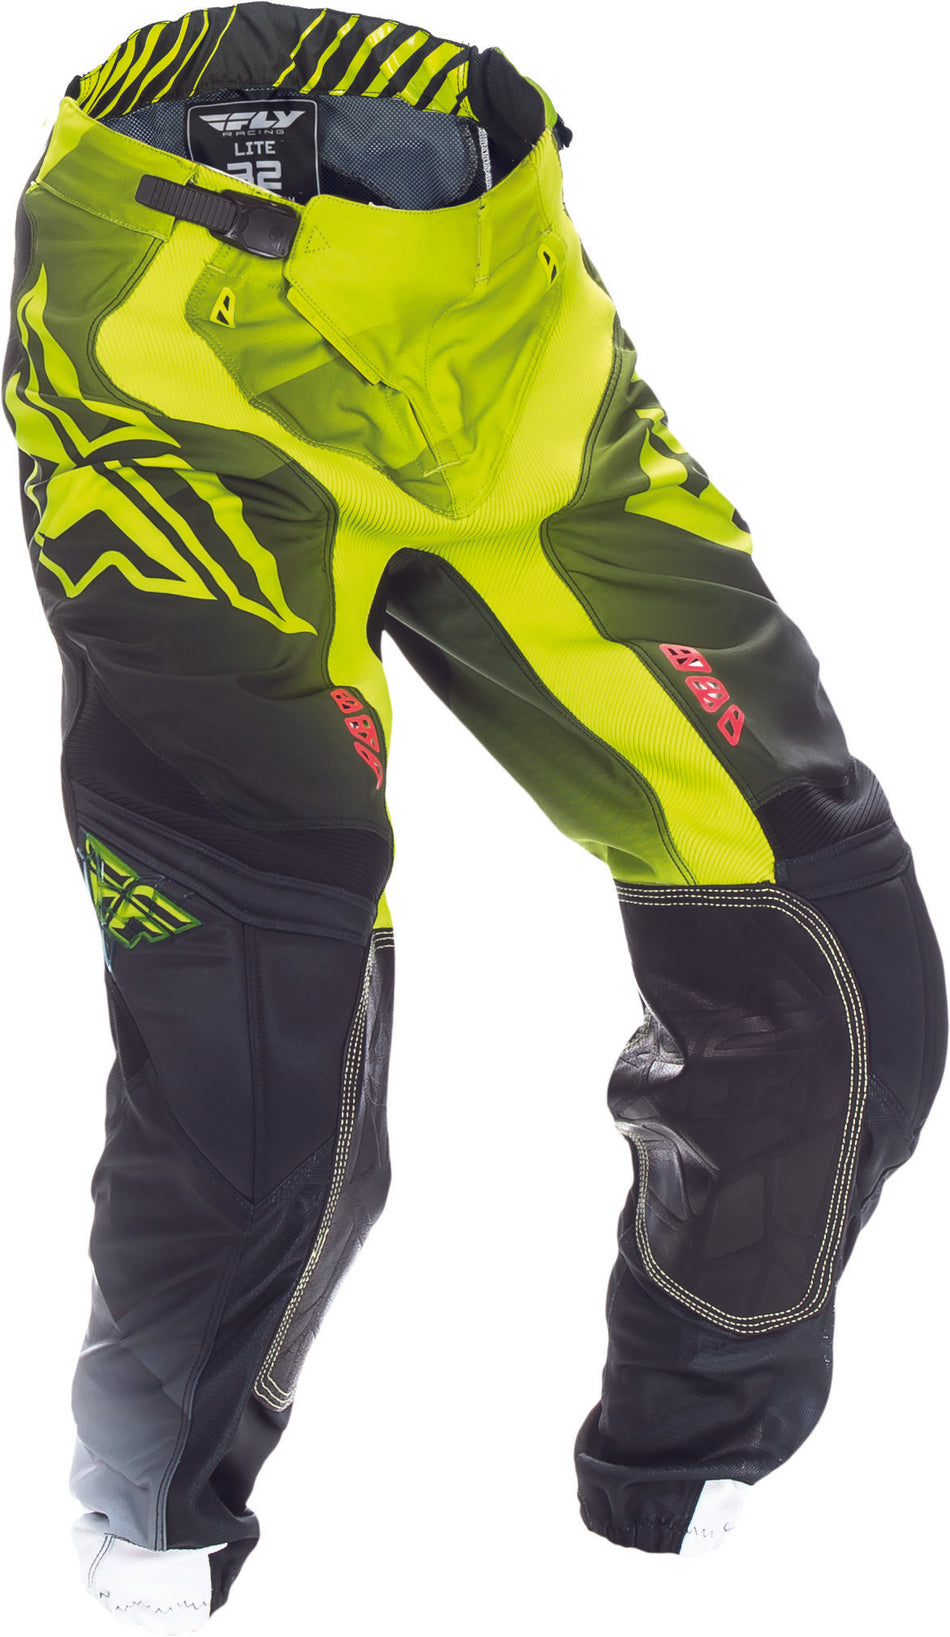 FLY RACING Lite Hydrogen Pant Lime/Black/White Sz 28s 370-73528S